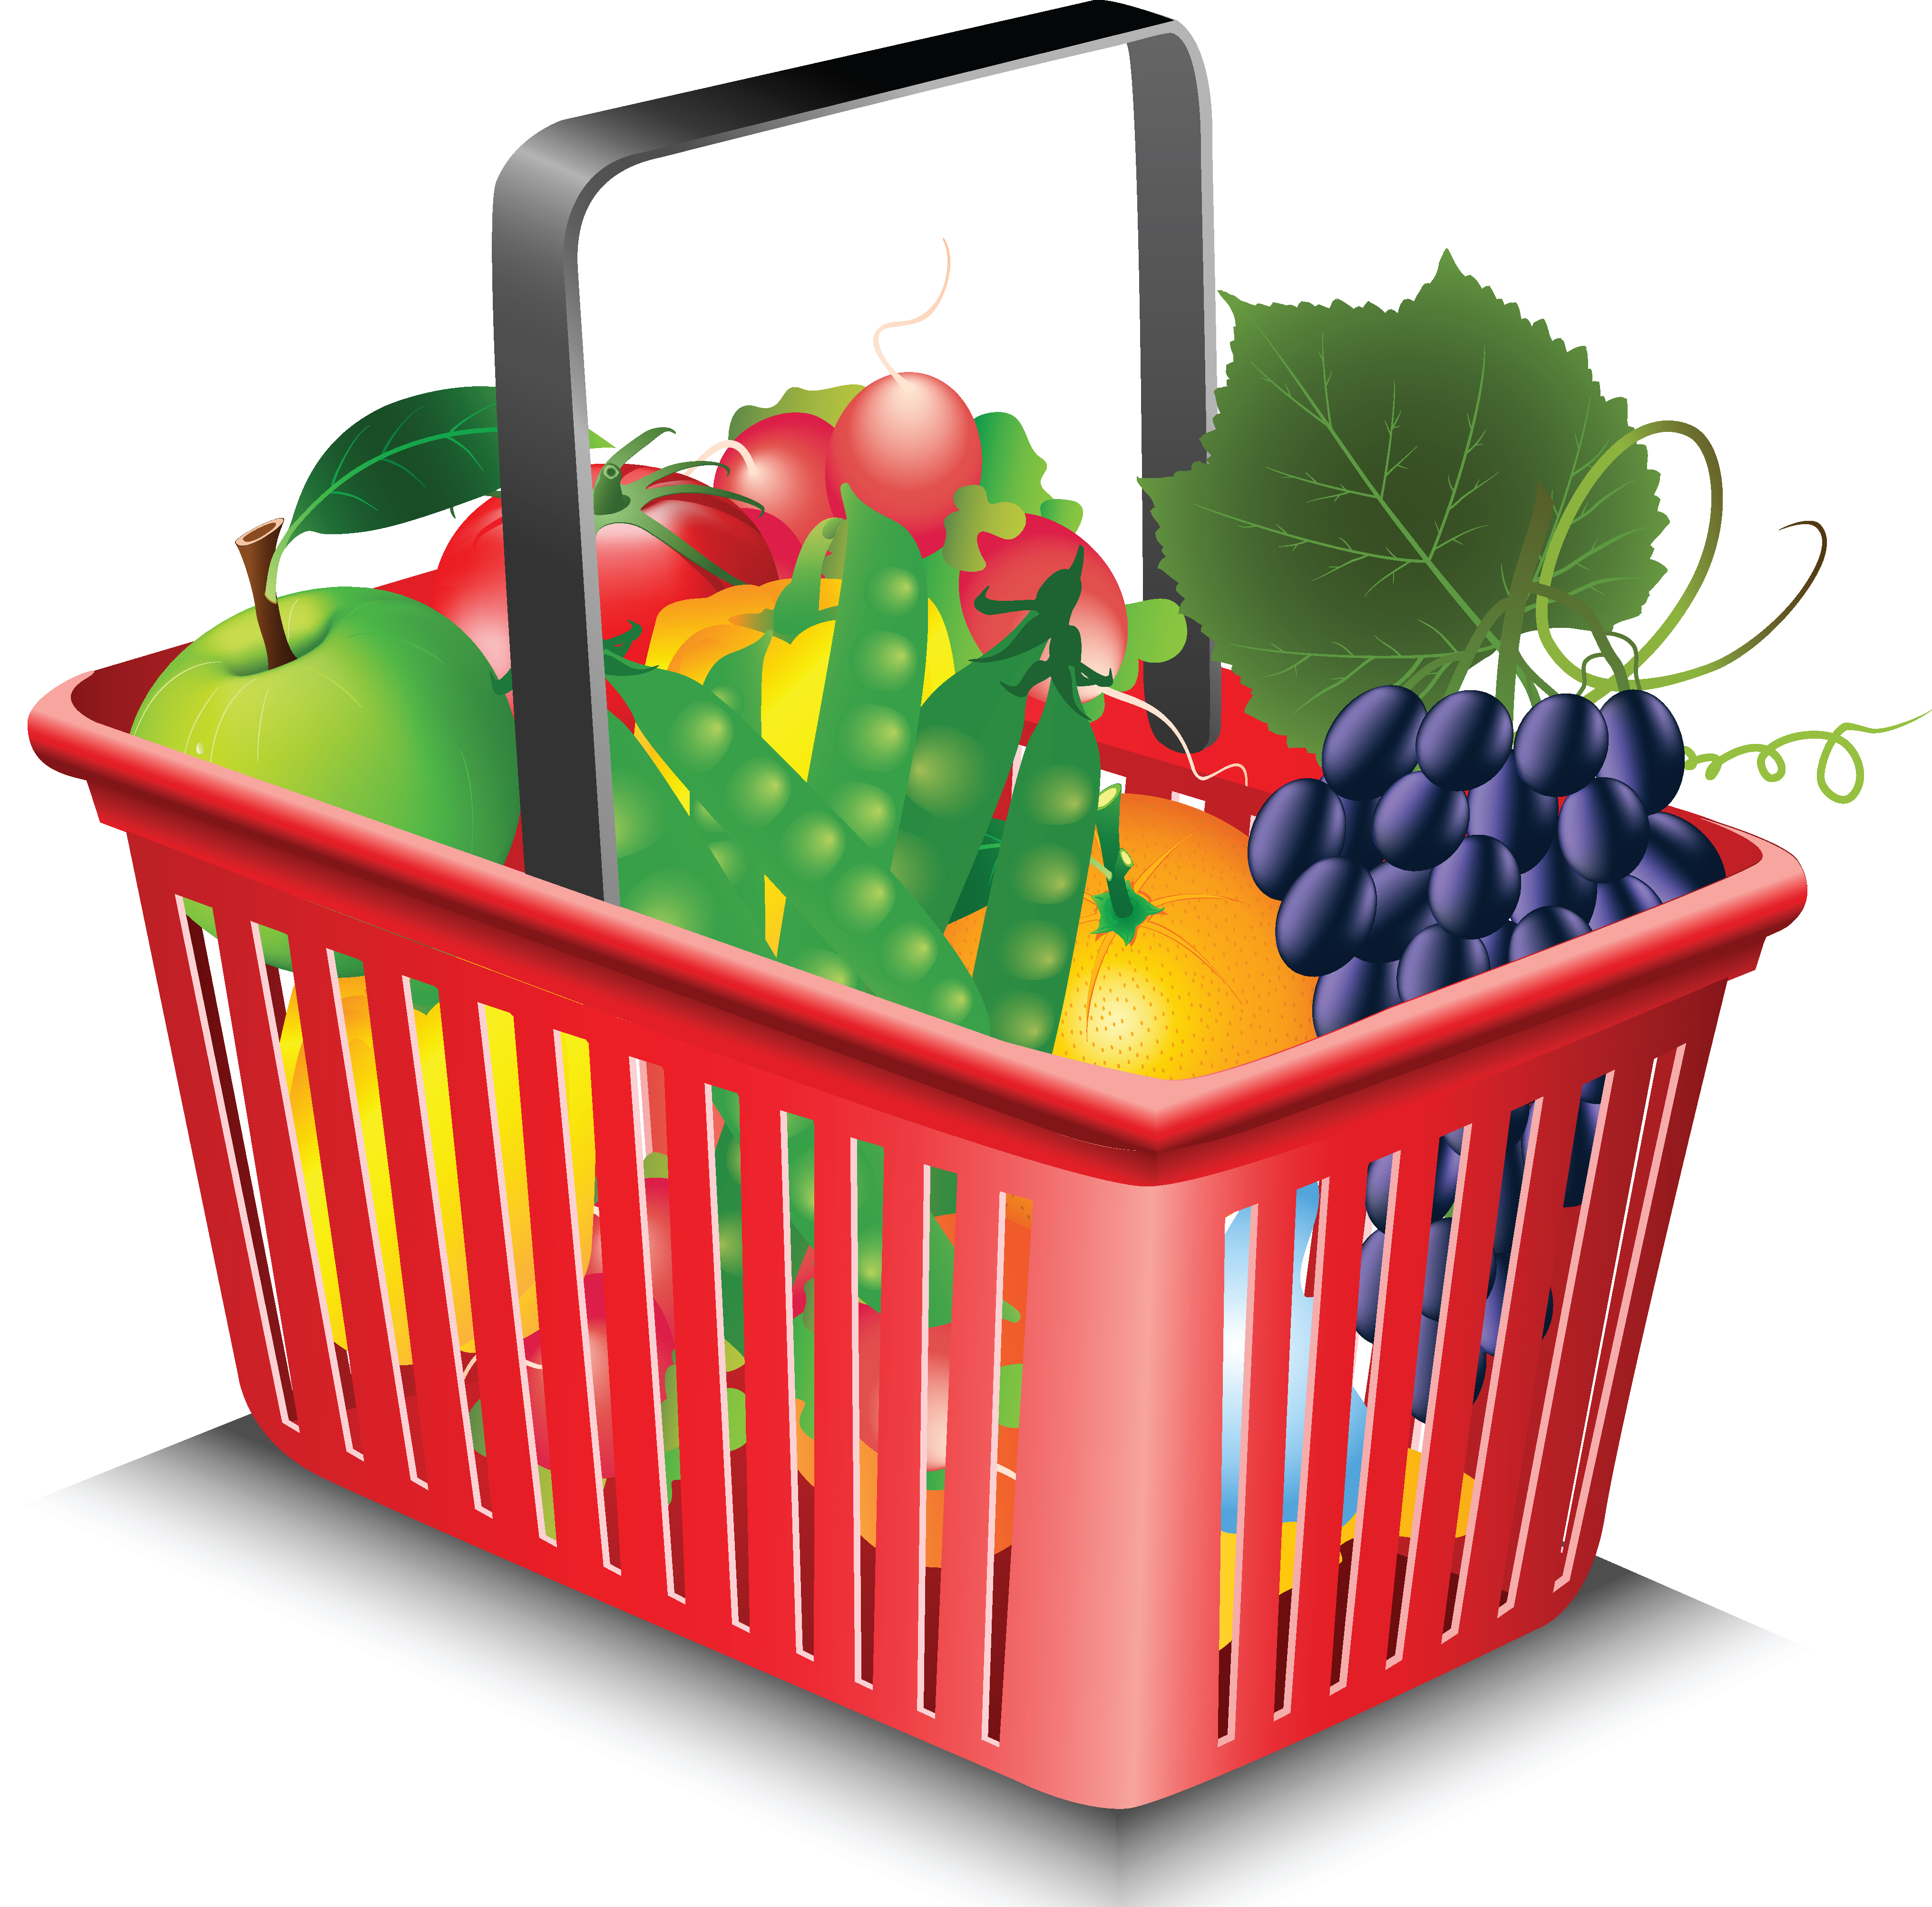 Shopping basket clipart 20 free Cliparts | Download images on